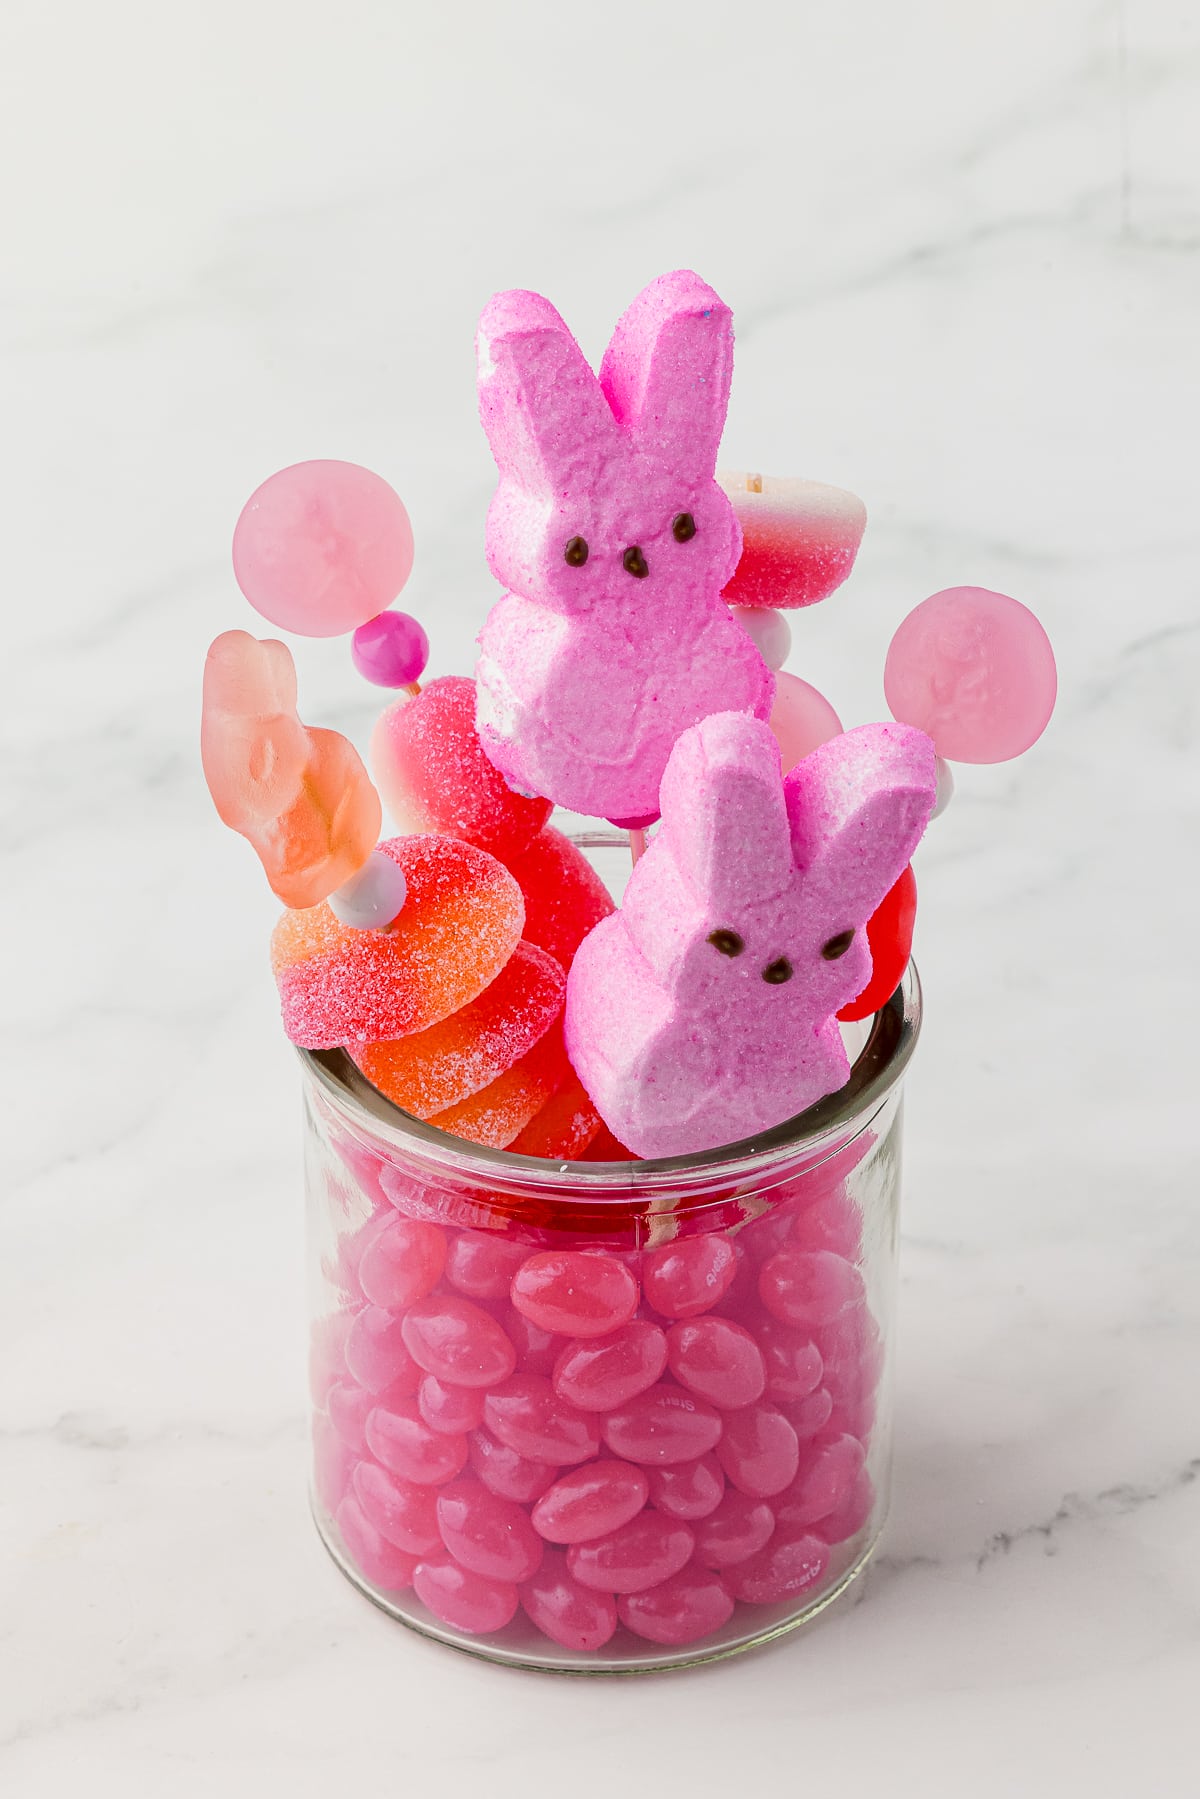 Pink jelly beans in a small jar with pink candy kabobs made with pink gummy candy and pink bunny peeps bought on a white countertop.